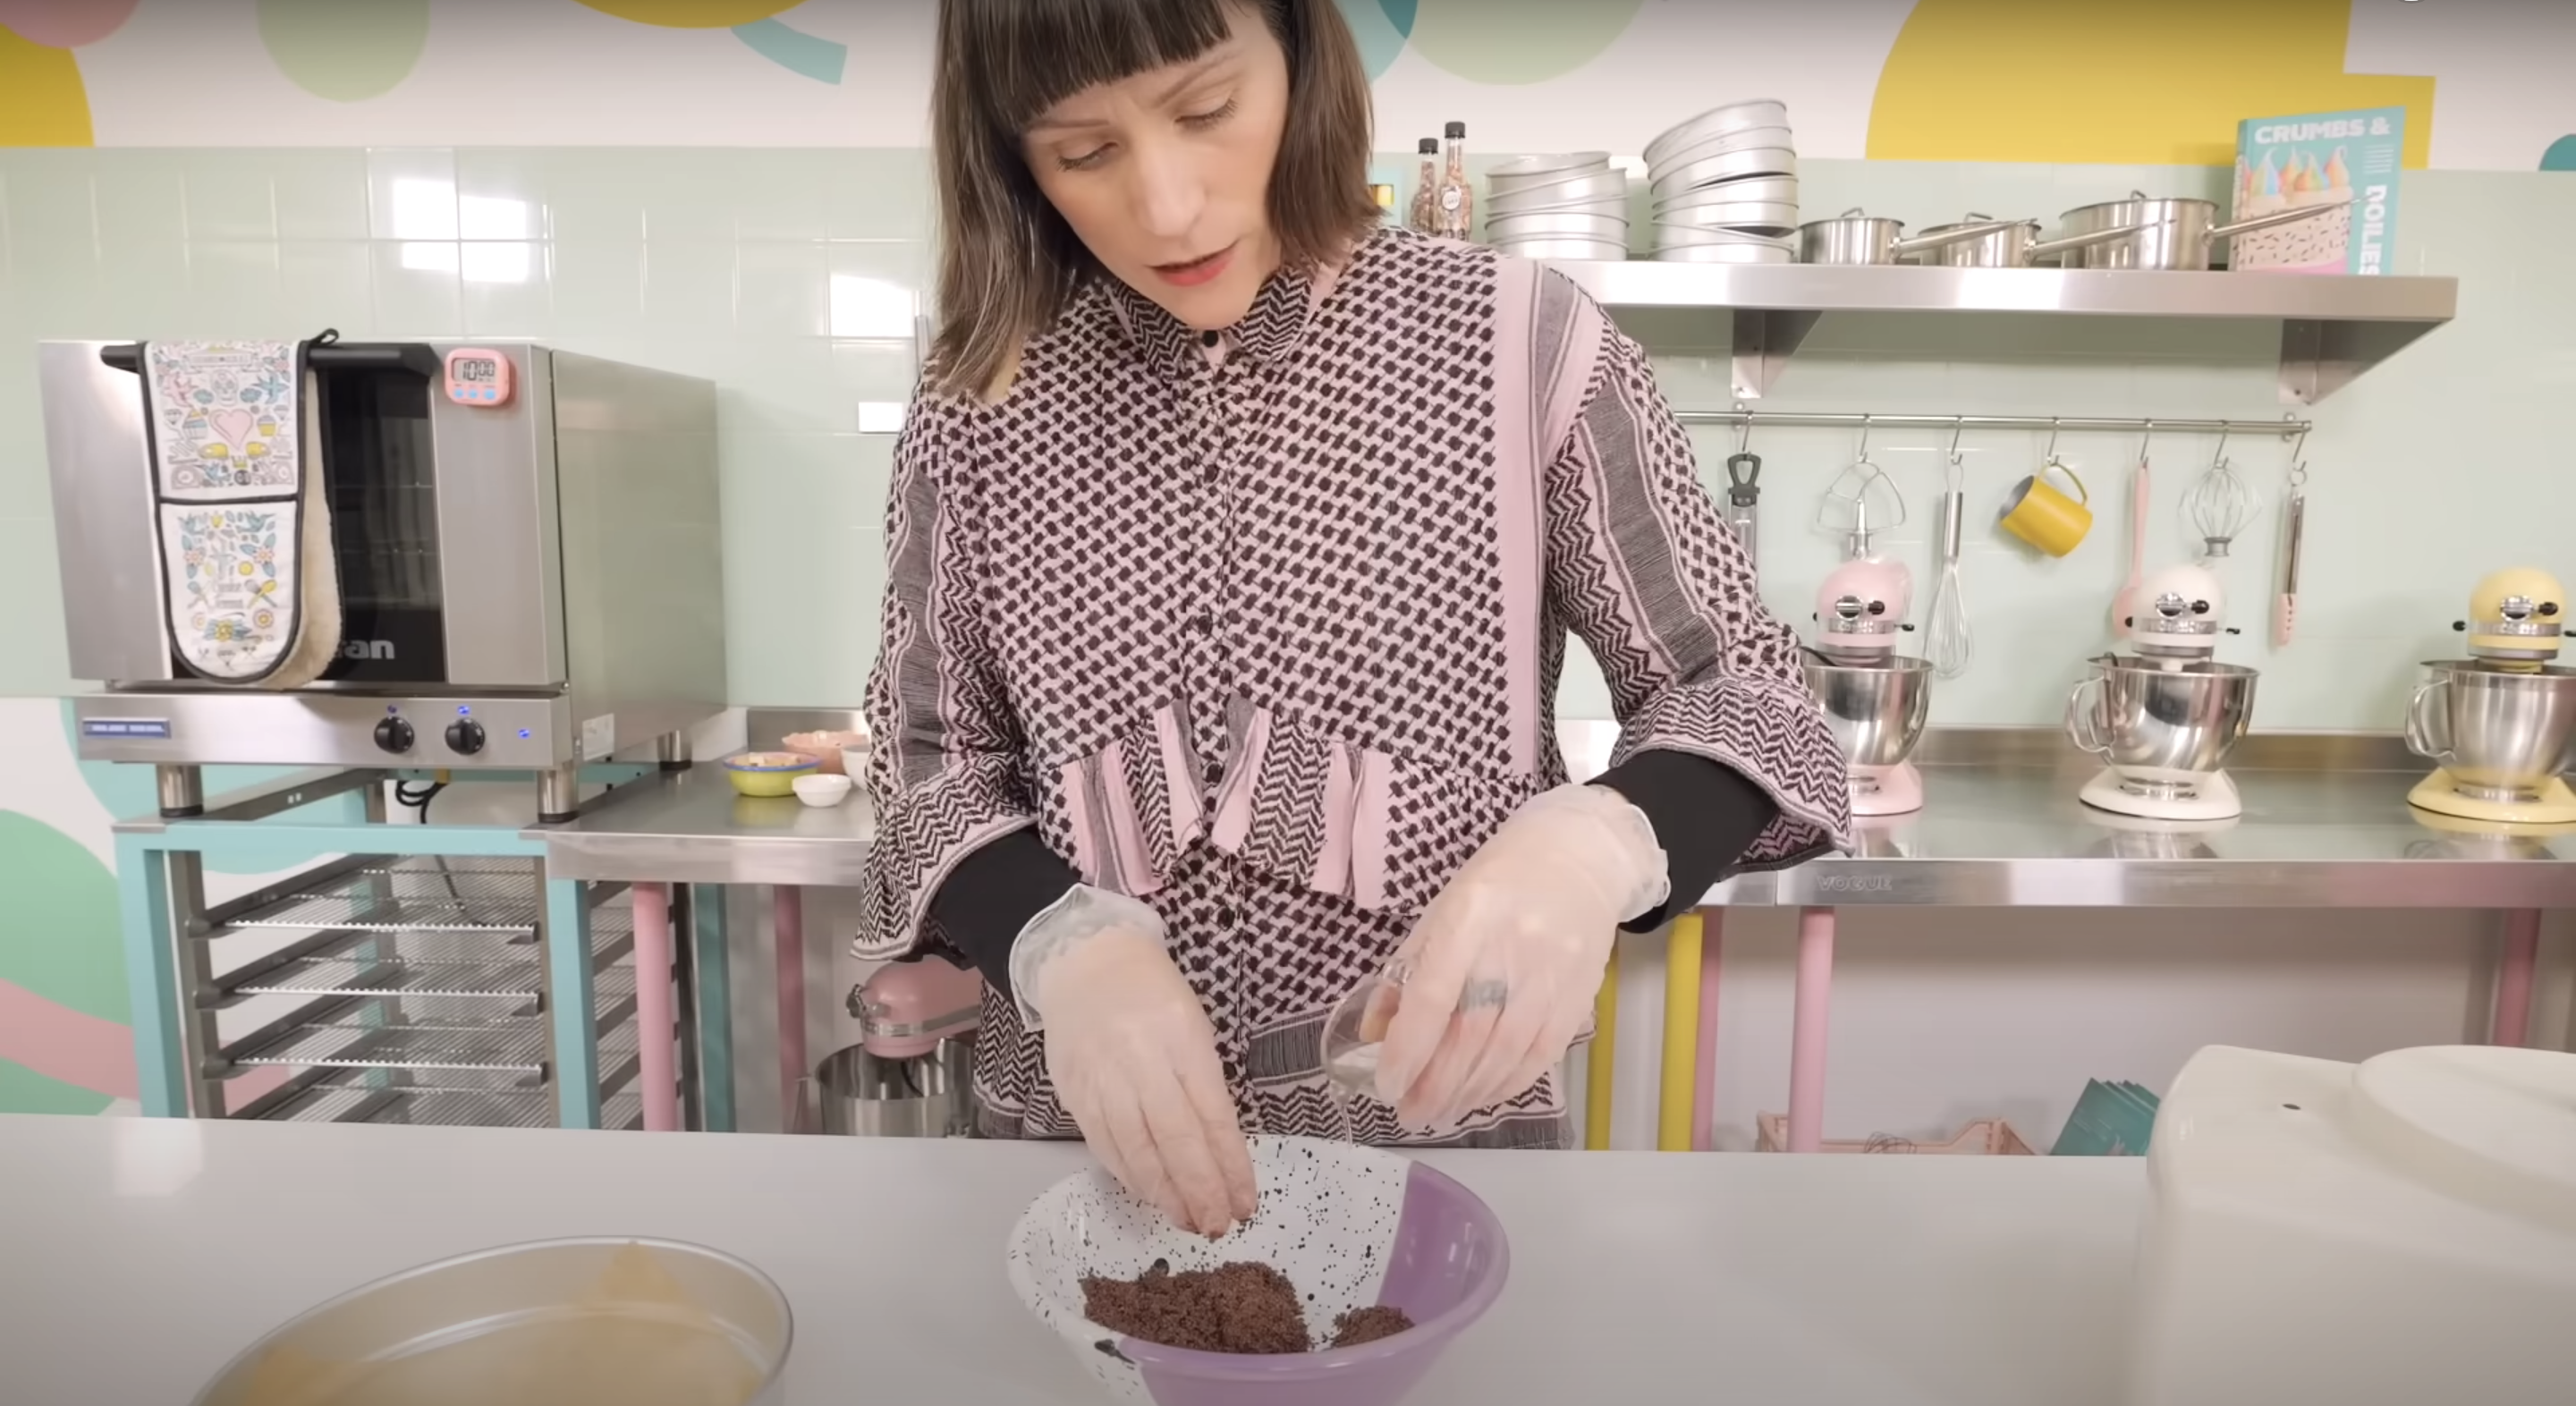 Jemma Wilson (a.k.a. Cupcake Jemma) bakes, in a YouTube video titled "What's better than Millionaires shortbread?!...BILLIONAIRES shortbread! | CupcakeJemma